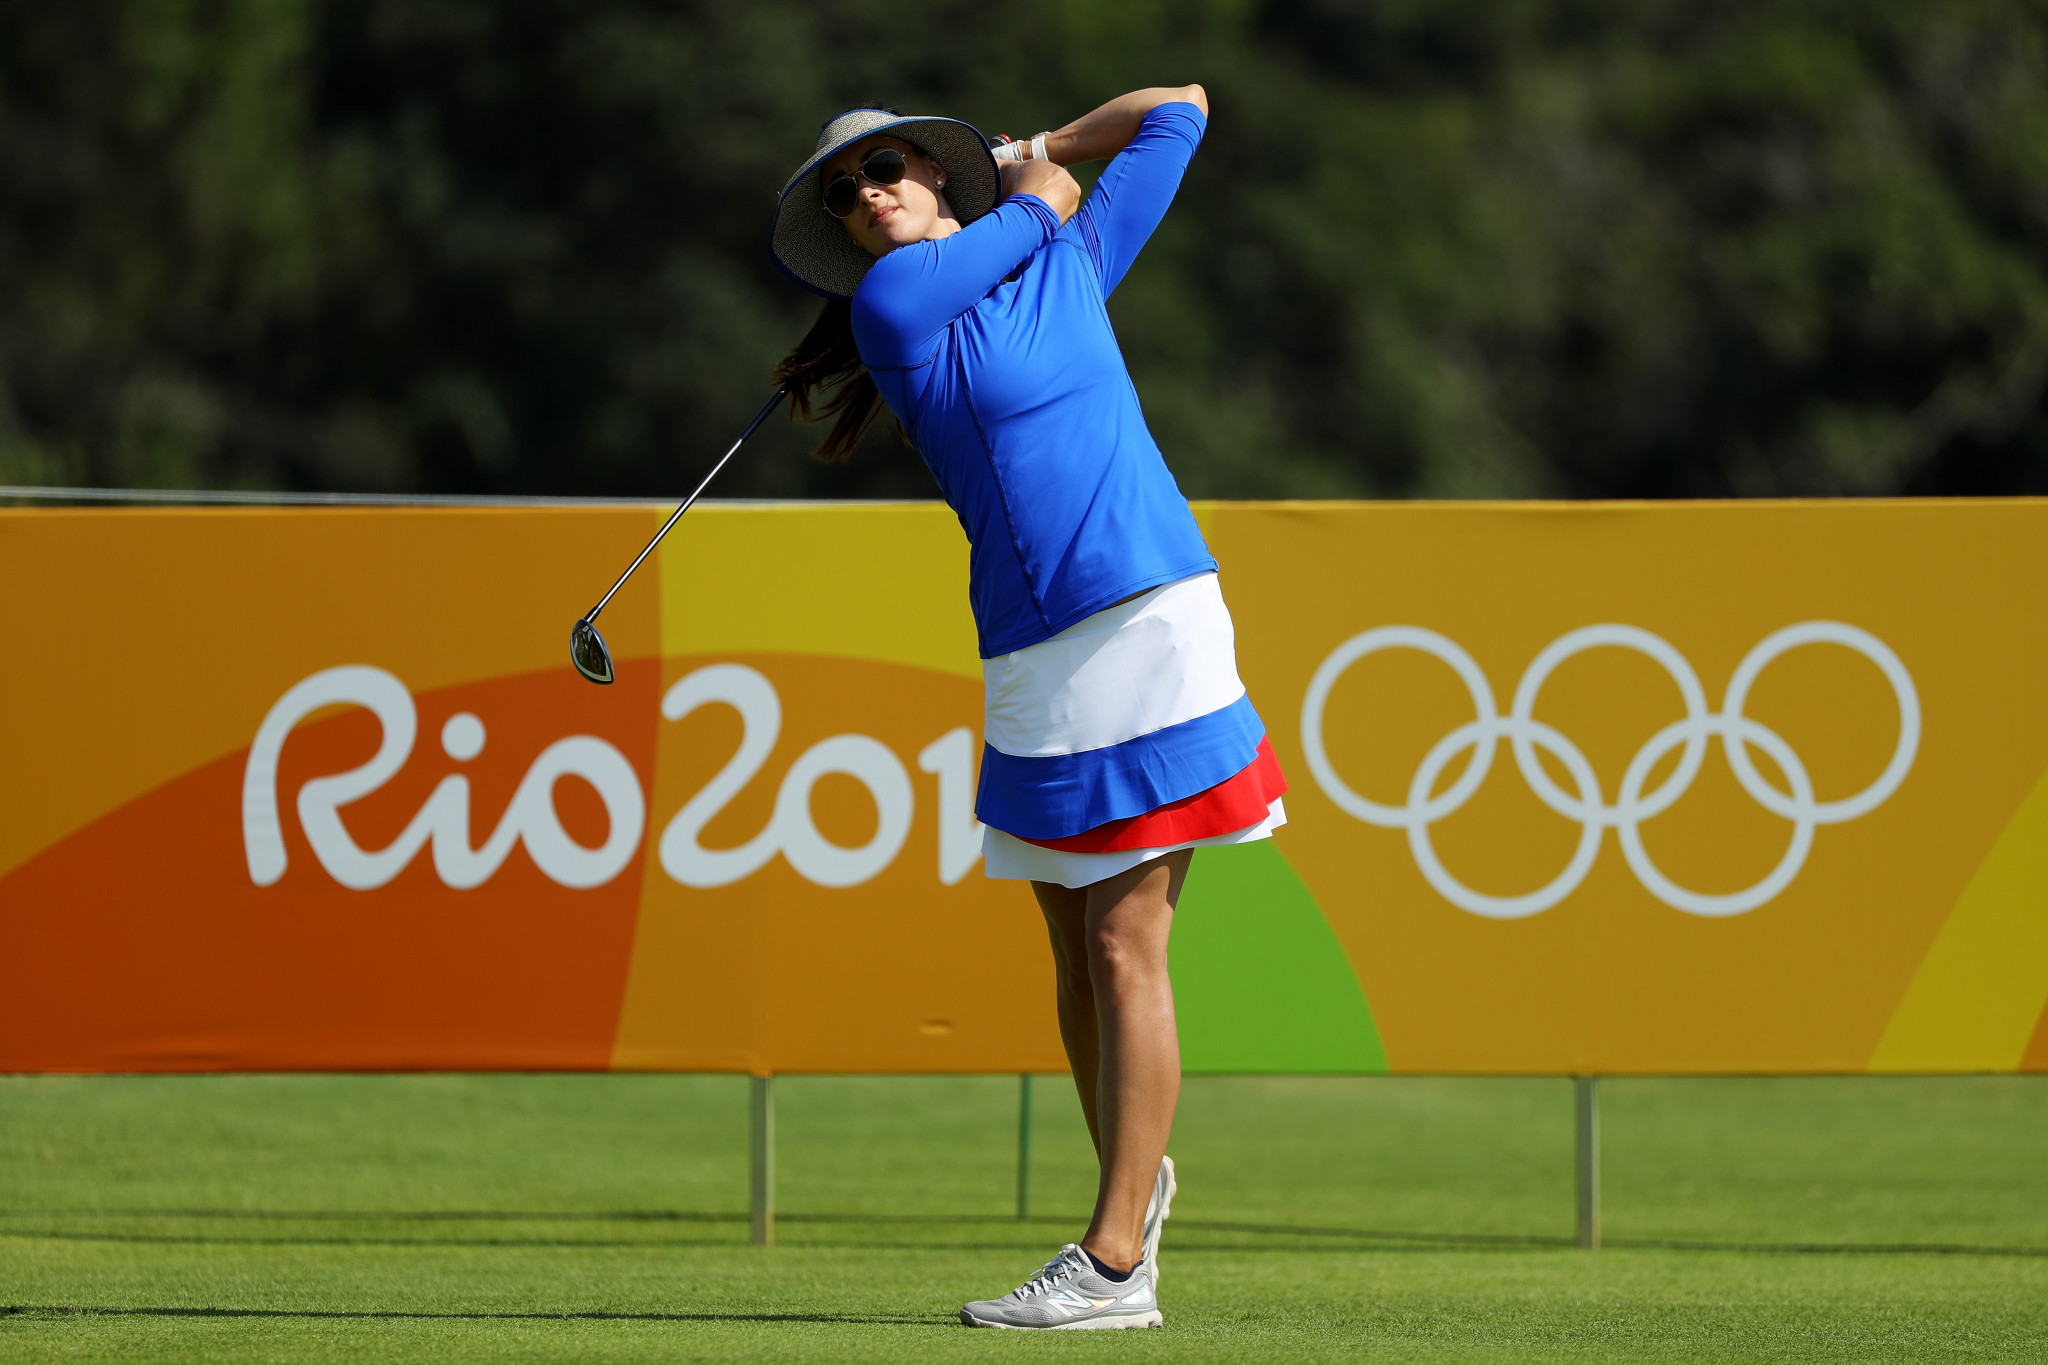 Russian golfer Maria Verchenova hit a hole-in-one in the final round of the Rio 2016 Olympics on her way to a 15th placed finish ©Getty Images